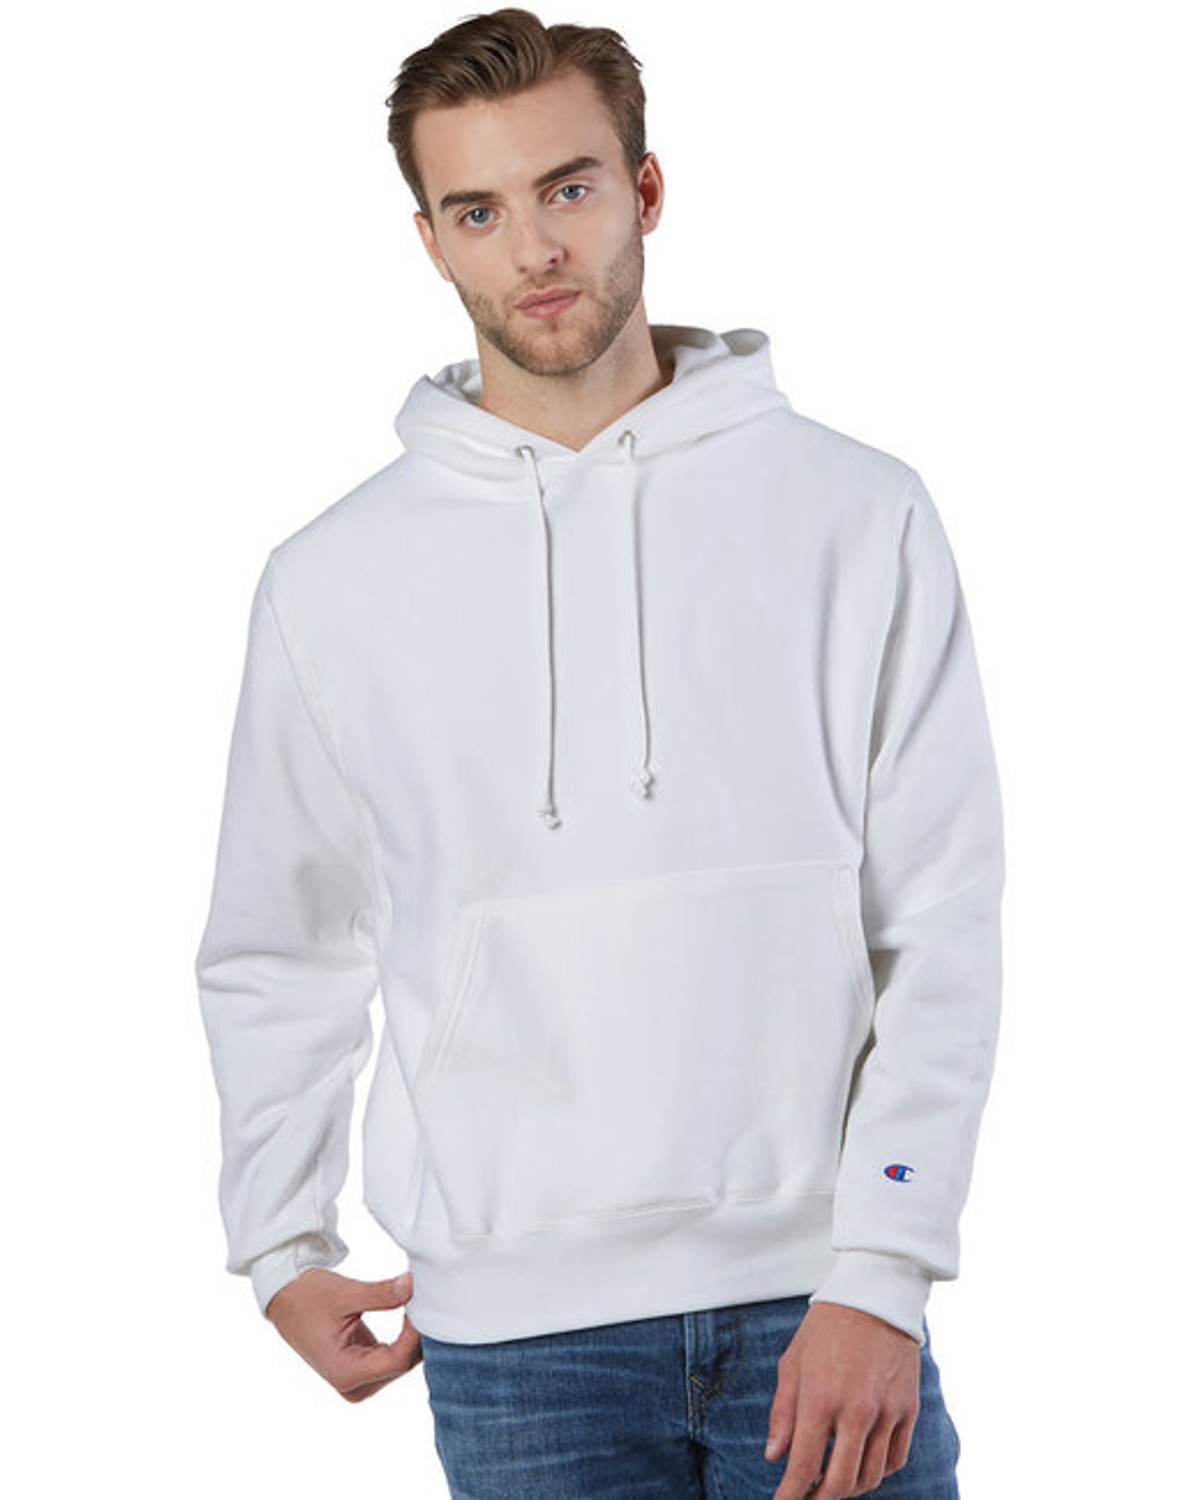 Men's Reverse Weave Pullover Hoodie from Champion